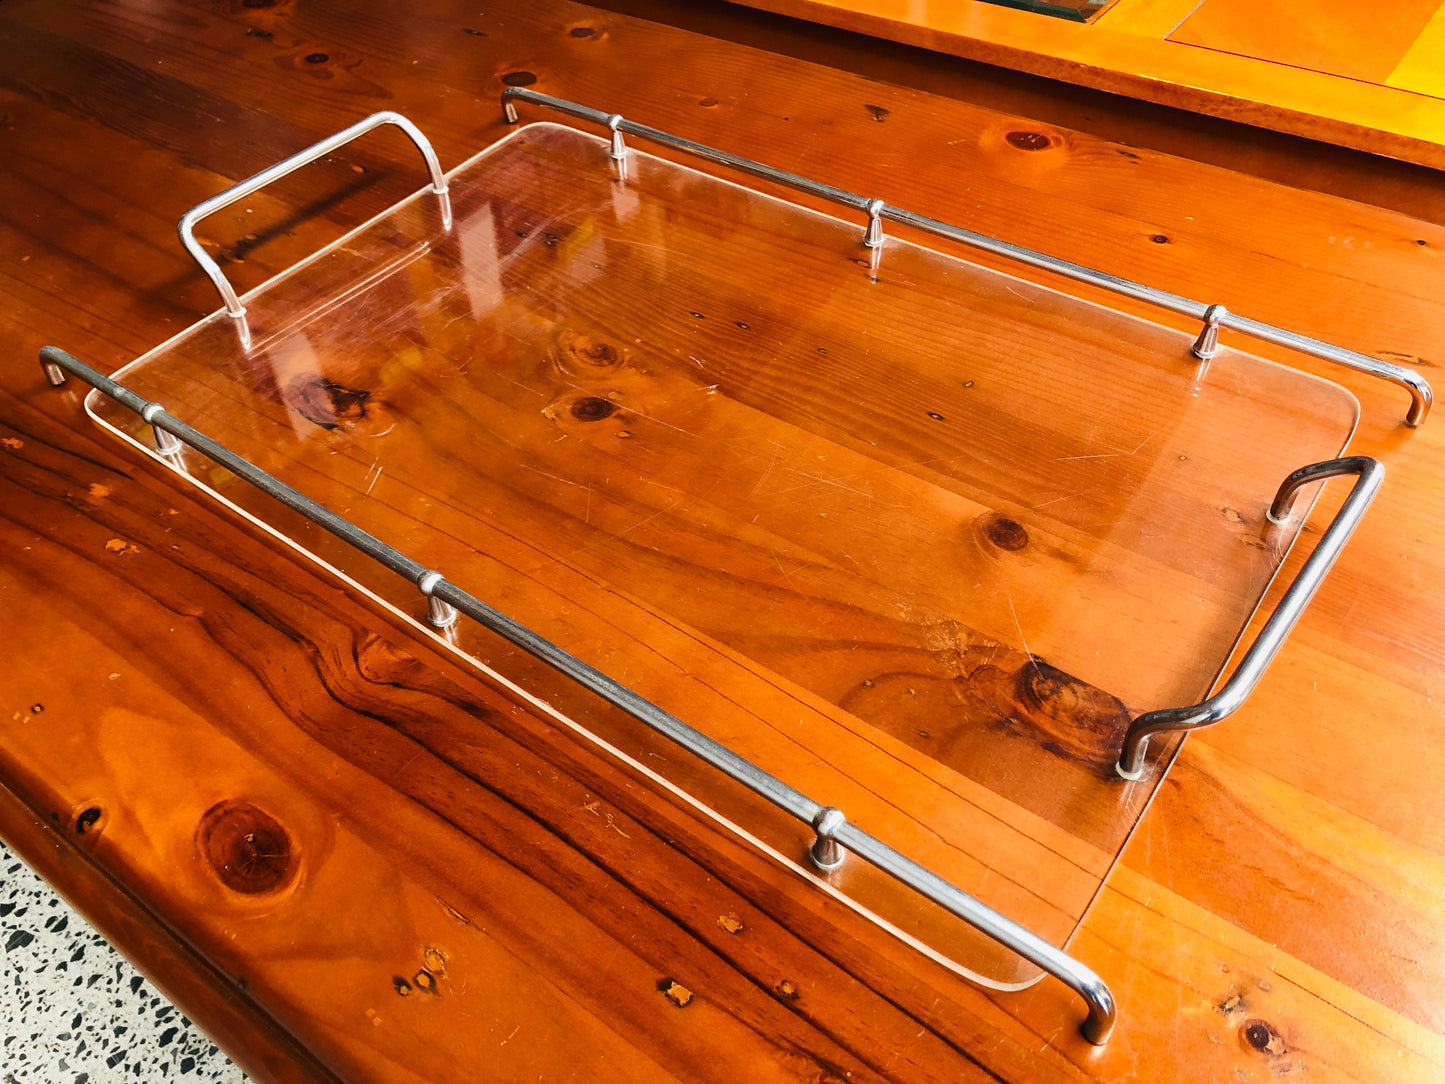 
                  
                    Retro Chrome and Perspex Trolley (15415)
                  
                